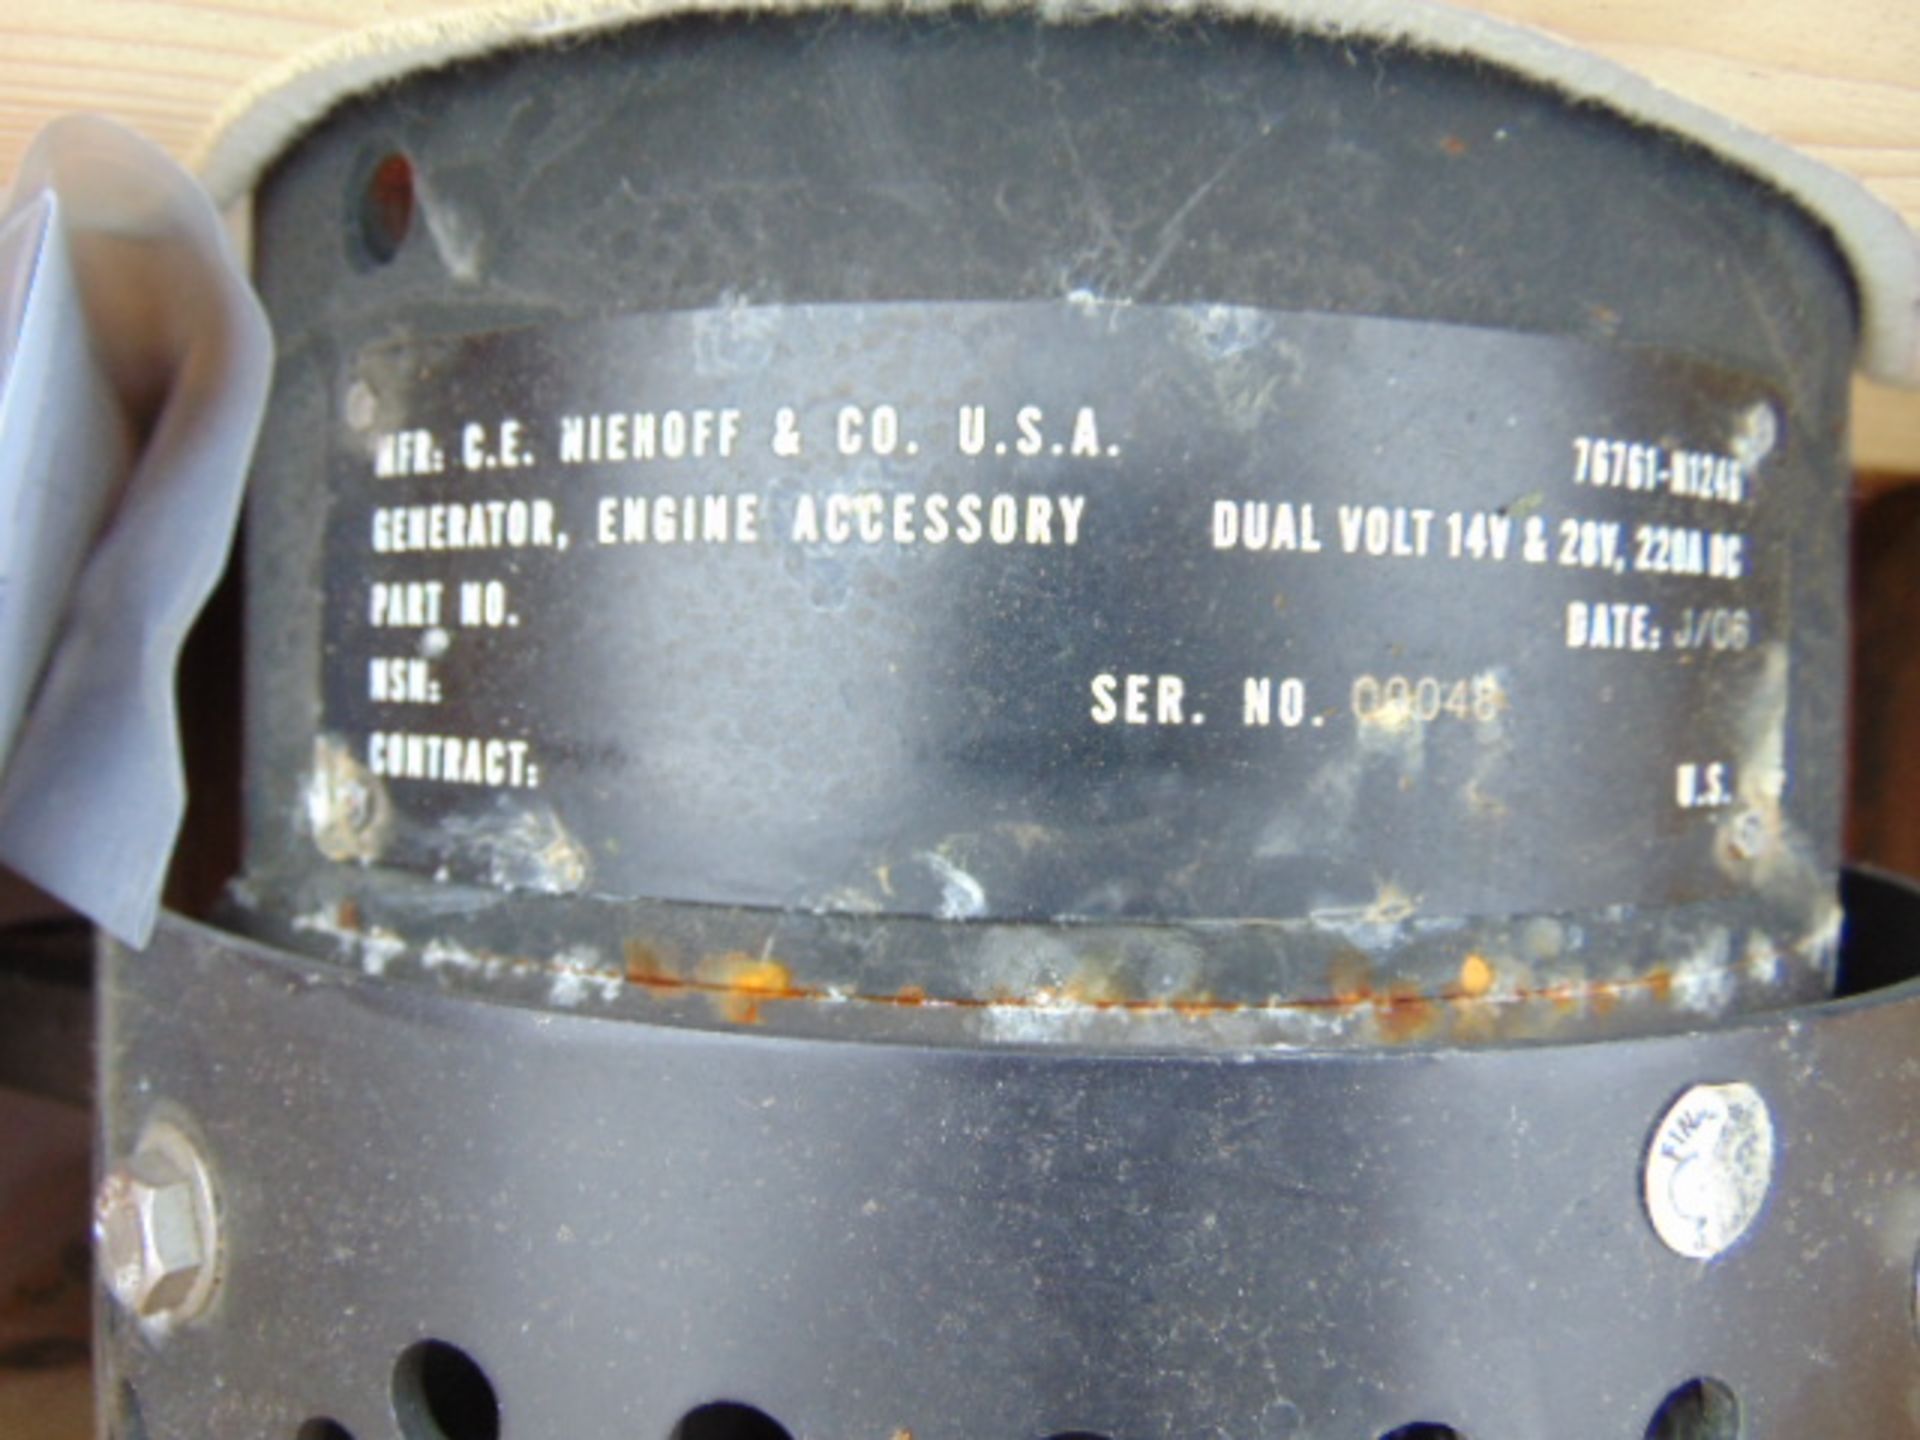 12 x Takeout Alternators for Combat Liasion Vehicle - Image 7 of 7